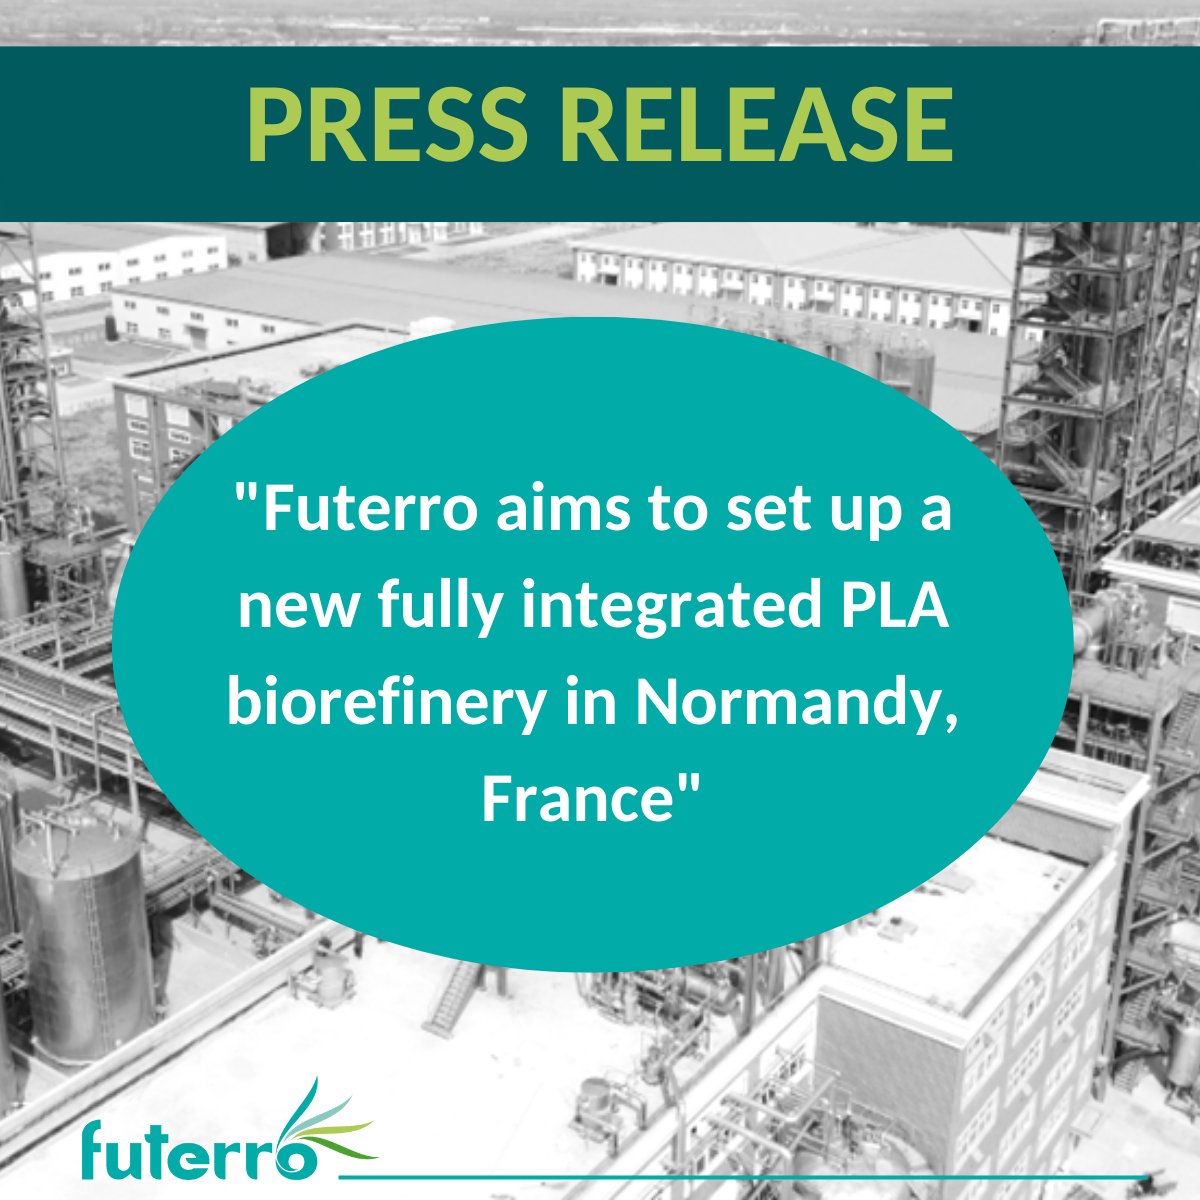 Futerro aims to set up a new fully integrated PLA biorefinery in Normandy, France.